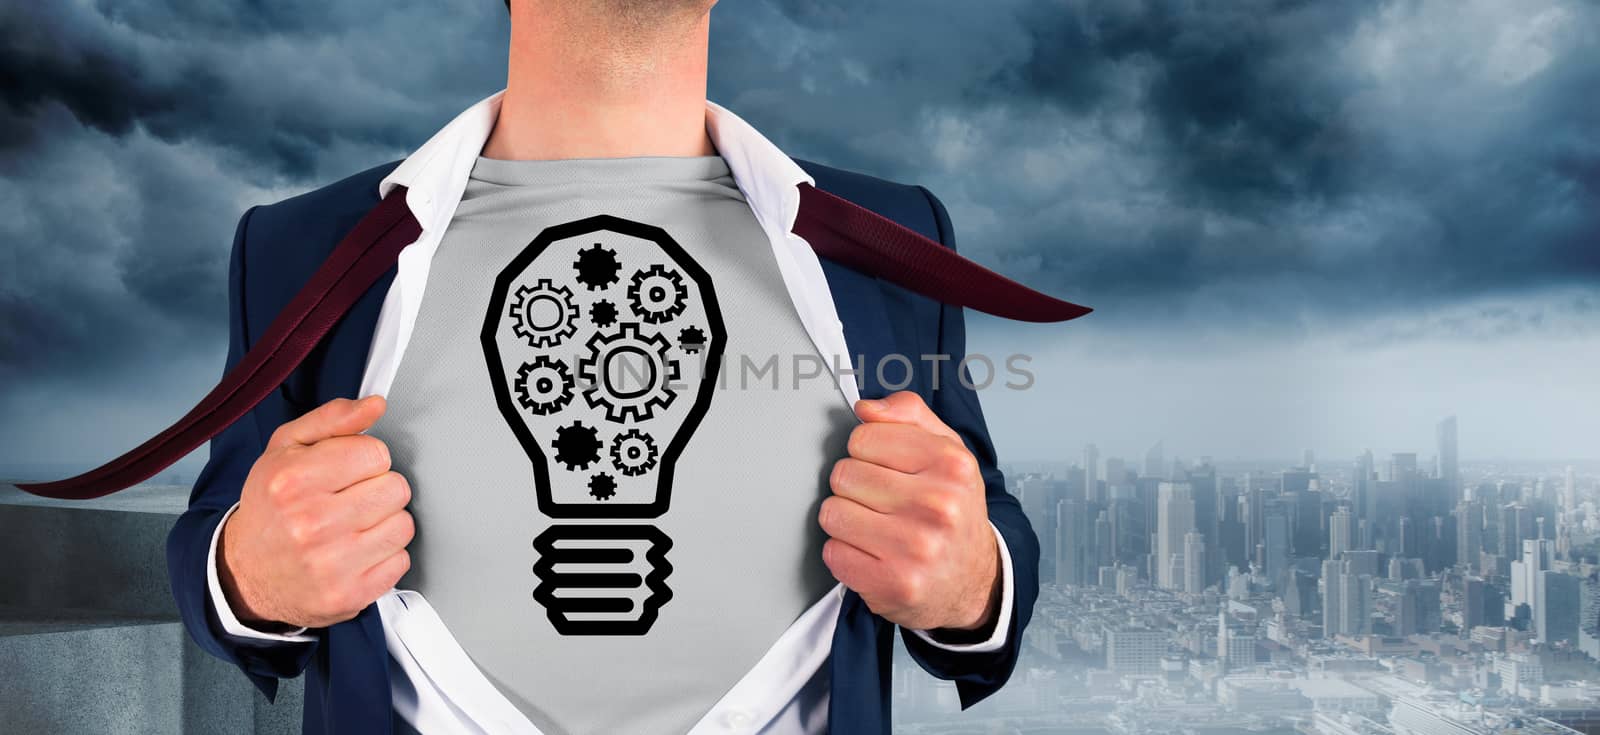 Businessman opening shirt in superhero style against coastline and city